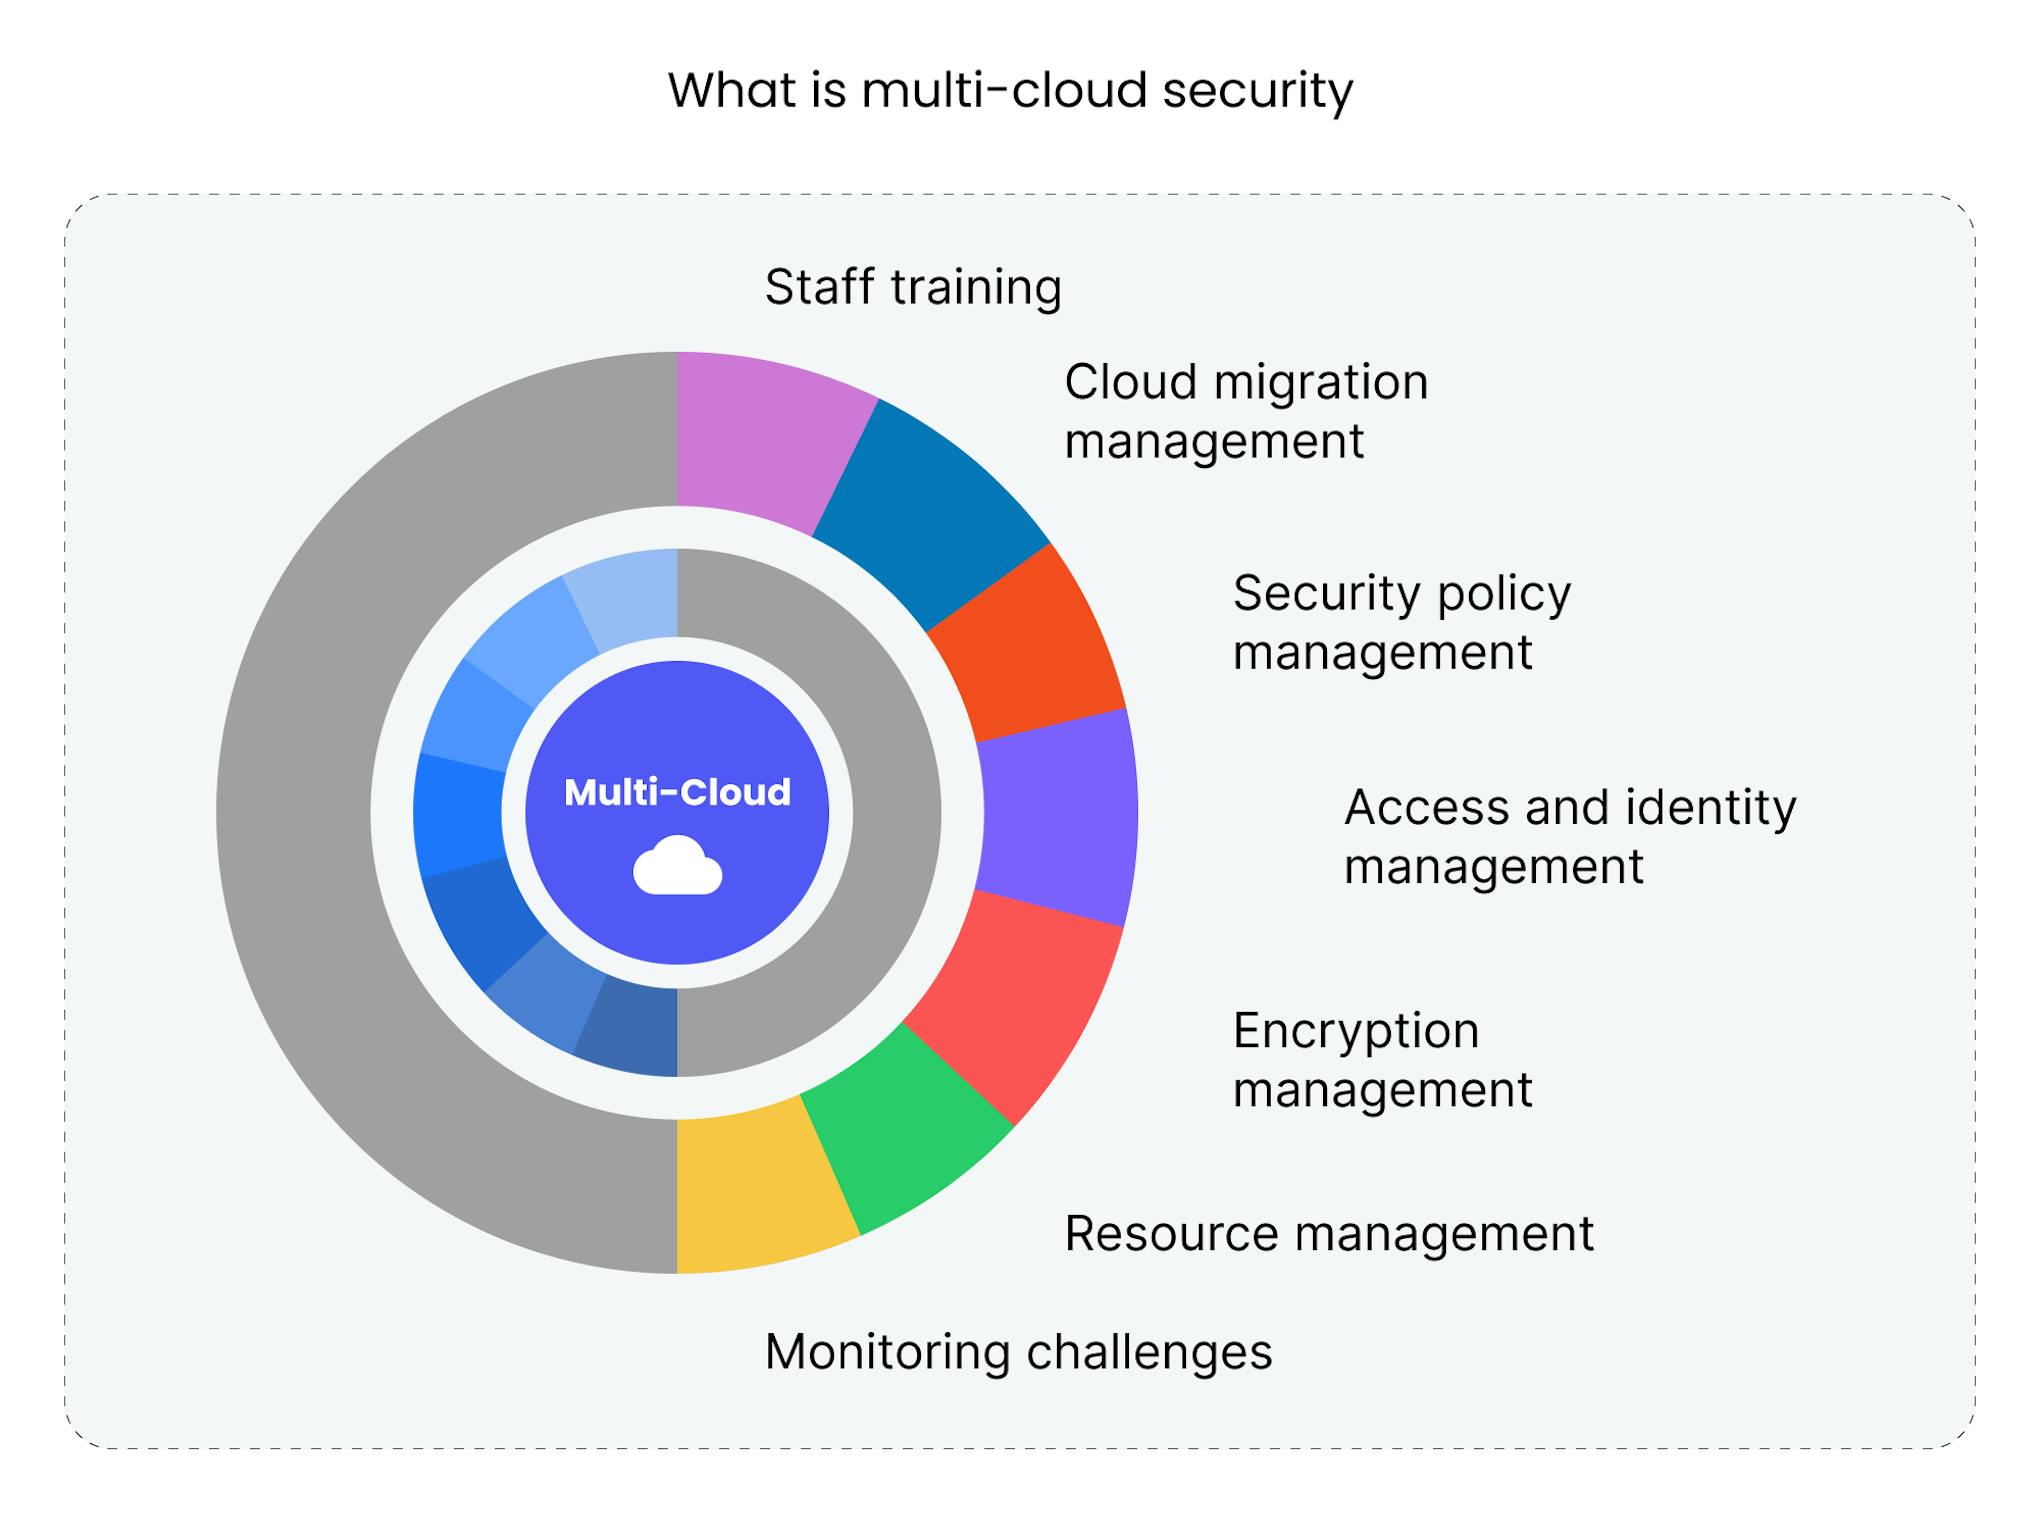 Multi-cloud security challenges